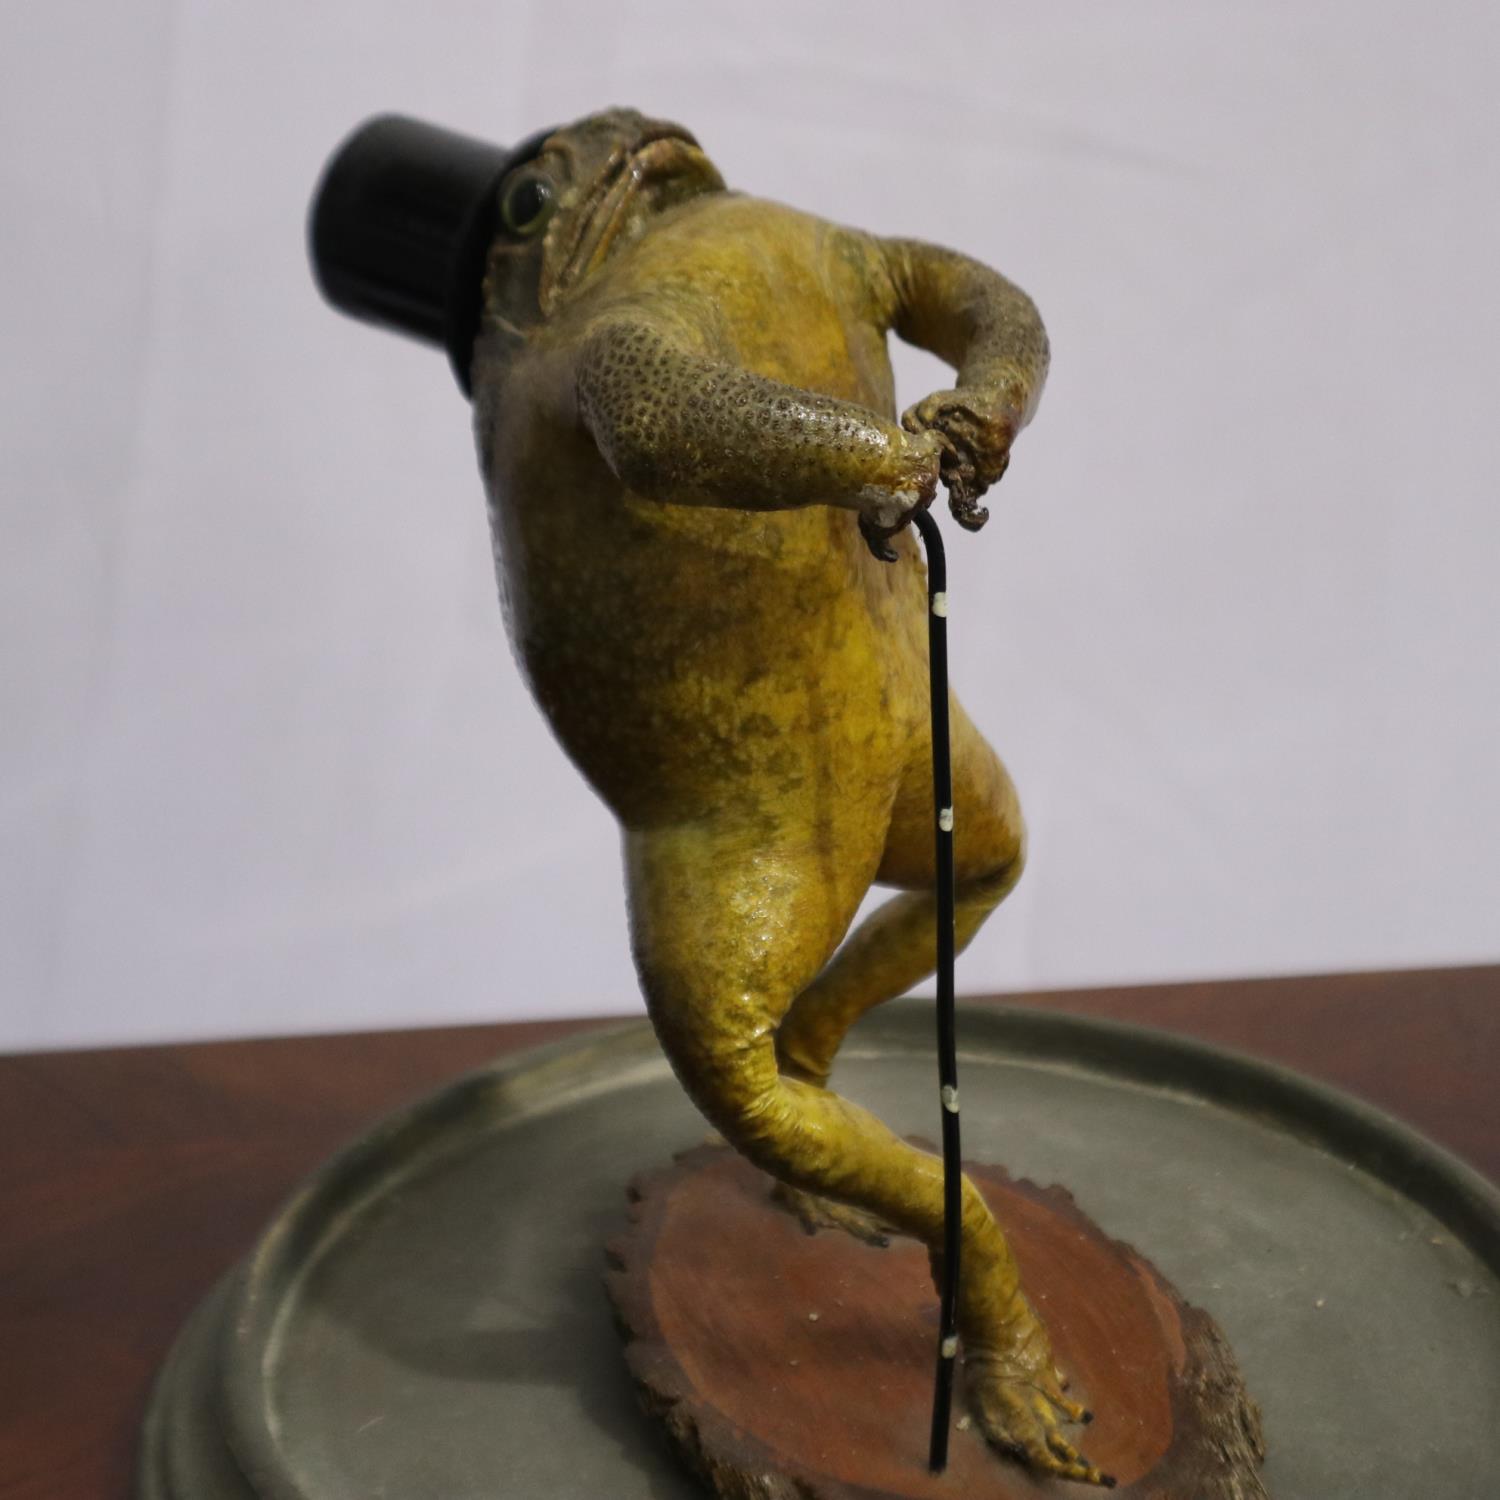 Taxidermic study of an anthropomorphic toad, wearing a top hat and holding a cane, set beneath a - Image 2 of 3